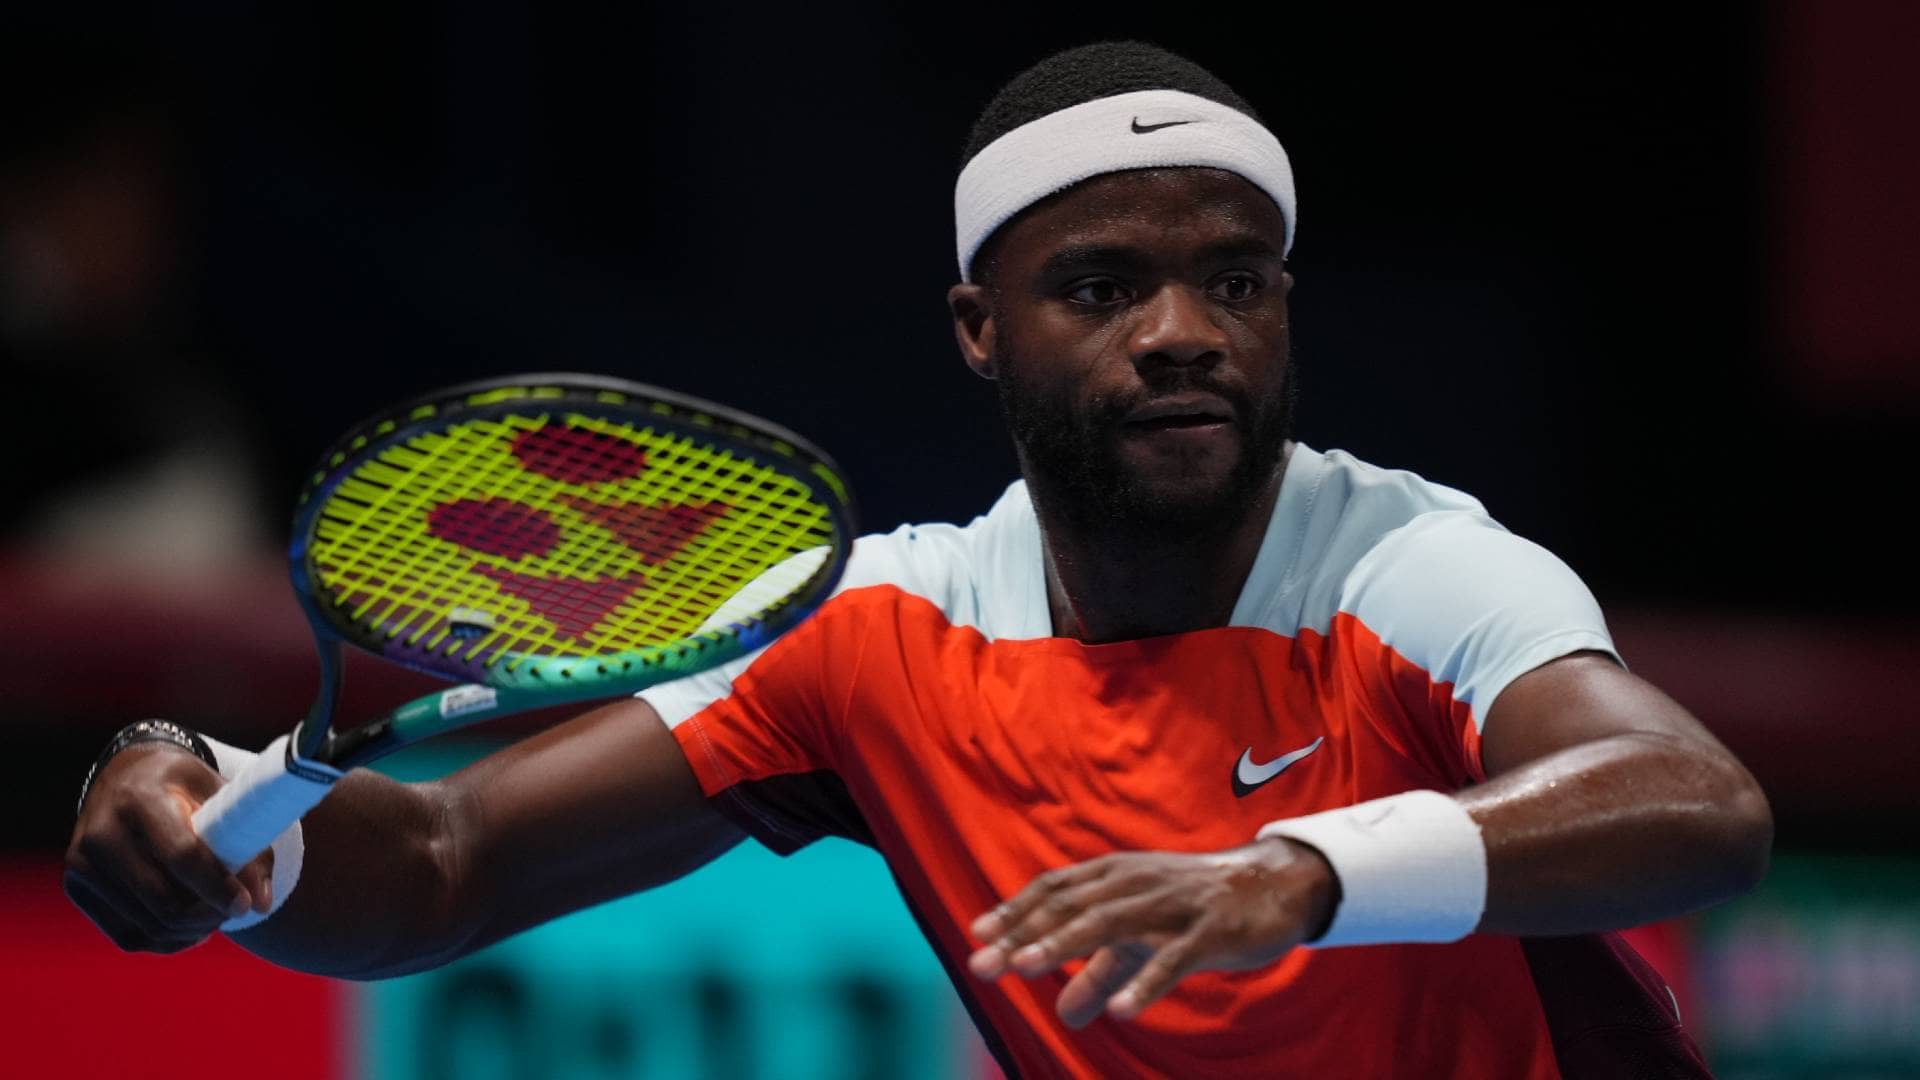 Frances Tiafoe wins the first eight games on the way to victory in his first Tokyo quarter-final.